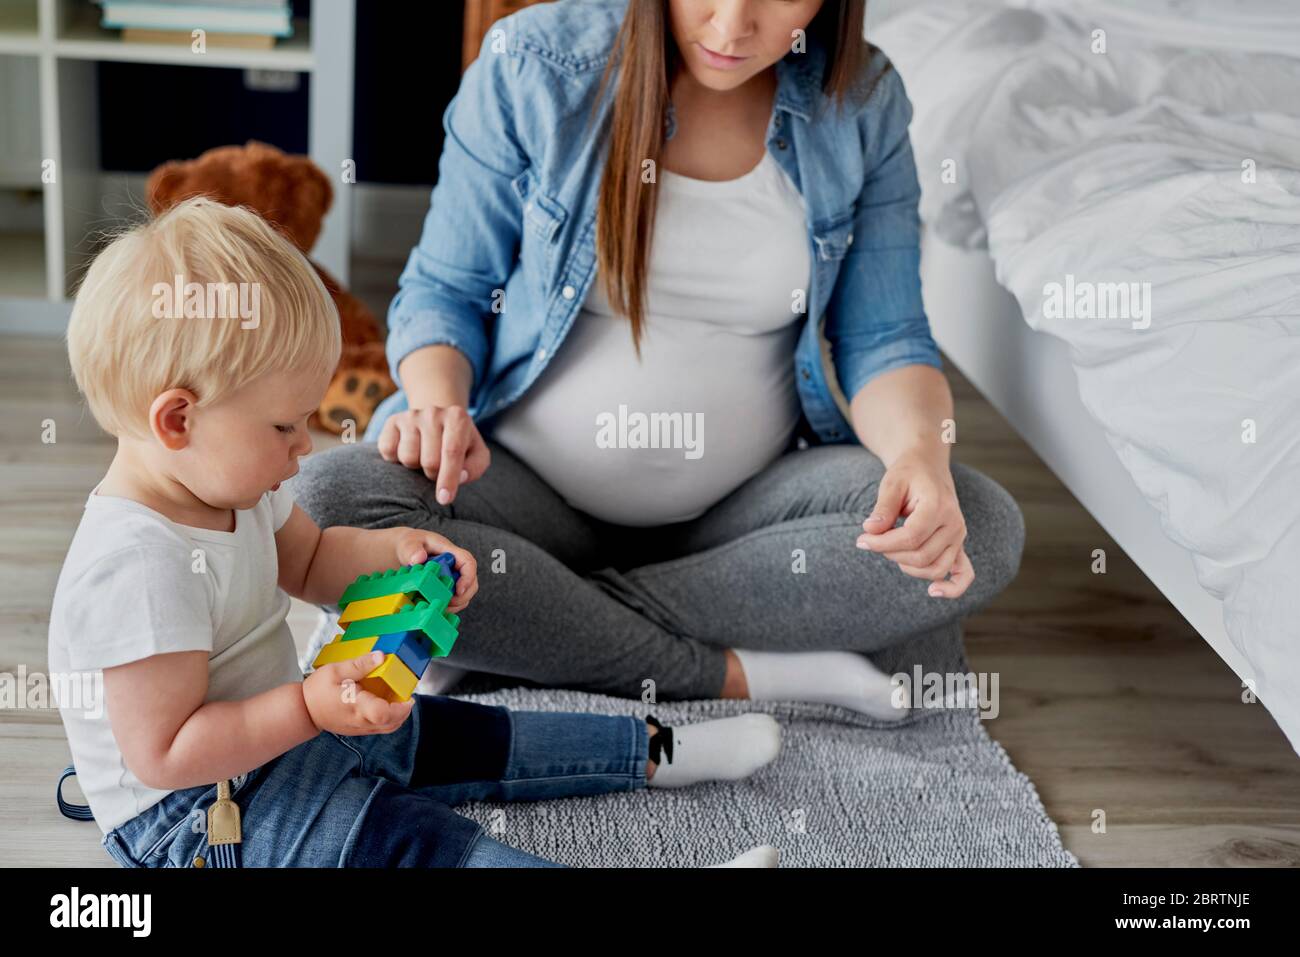 Pregnant mother playing toy blocks with her baby son Stock Photo